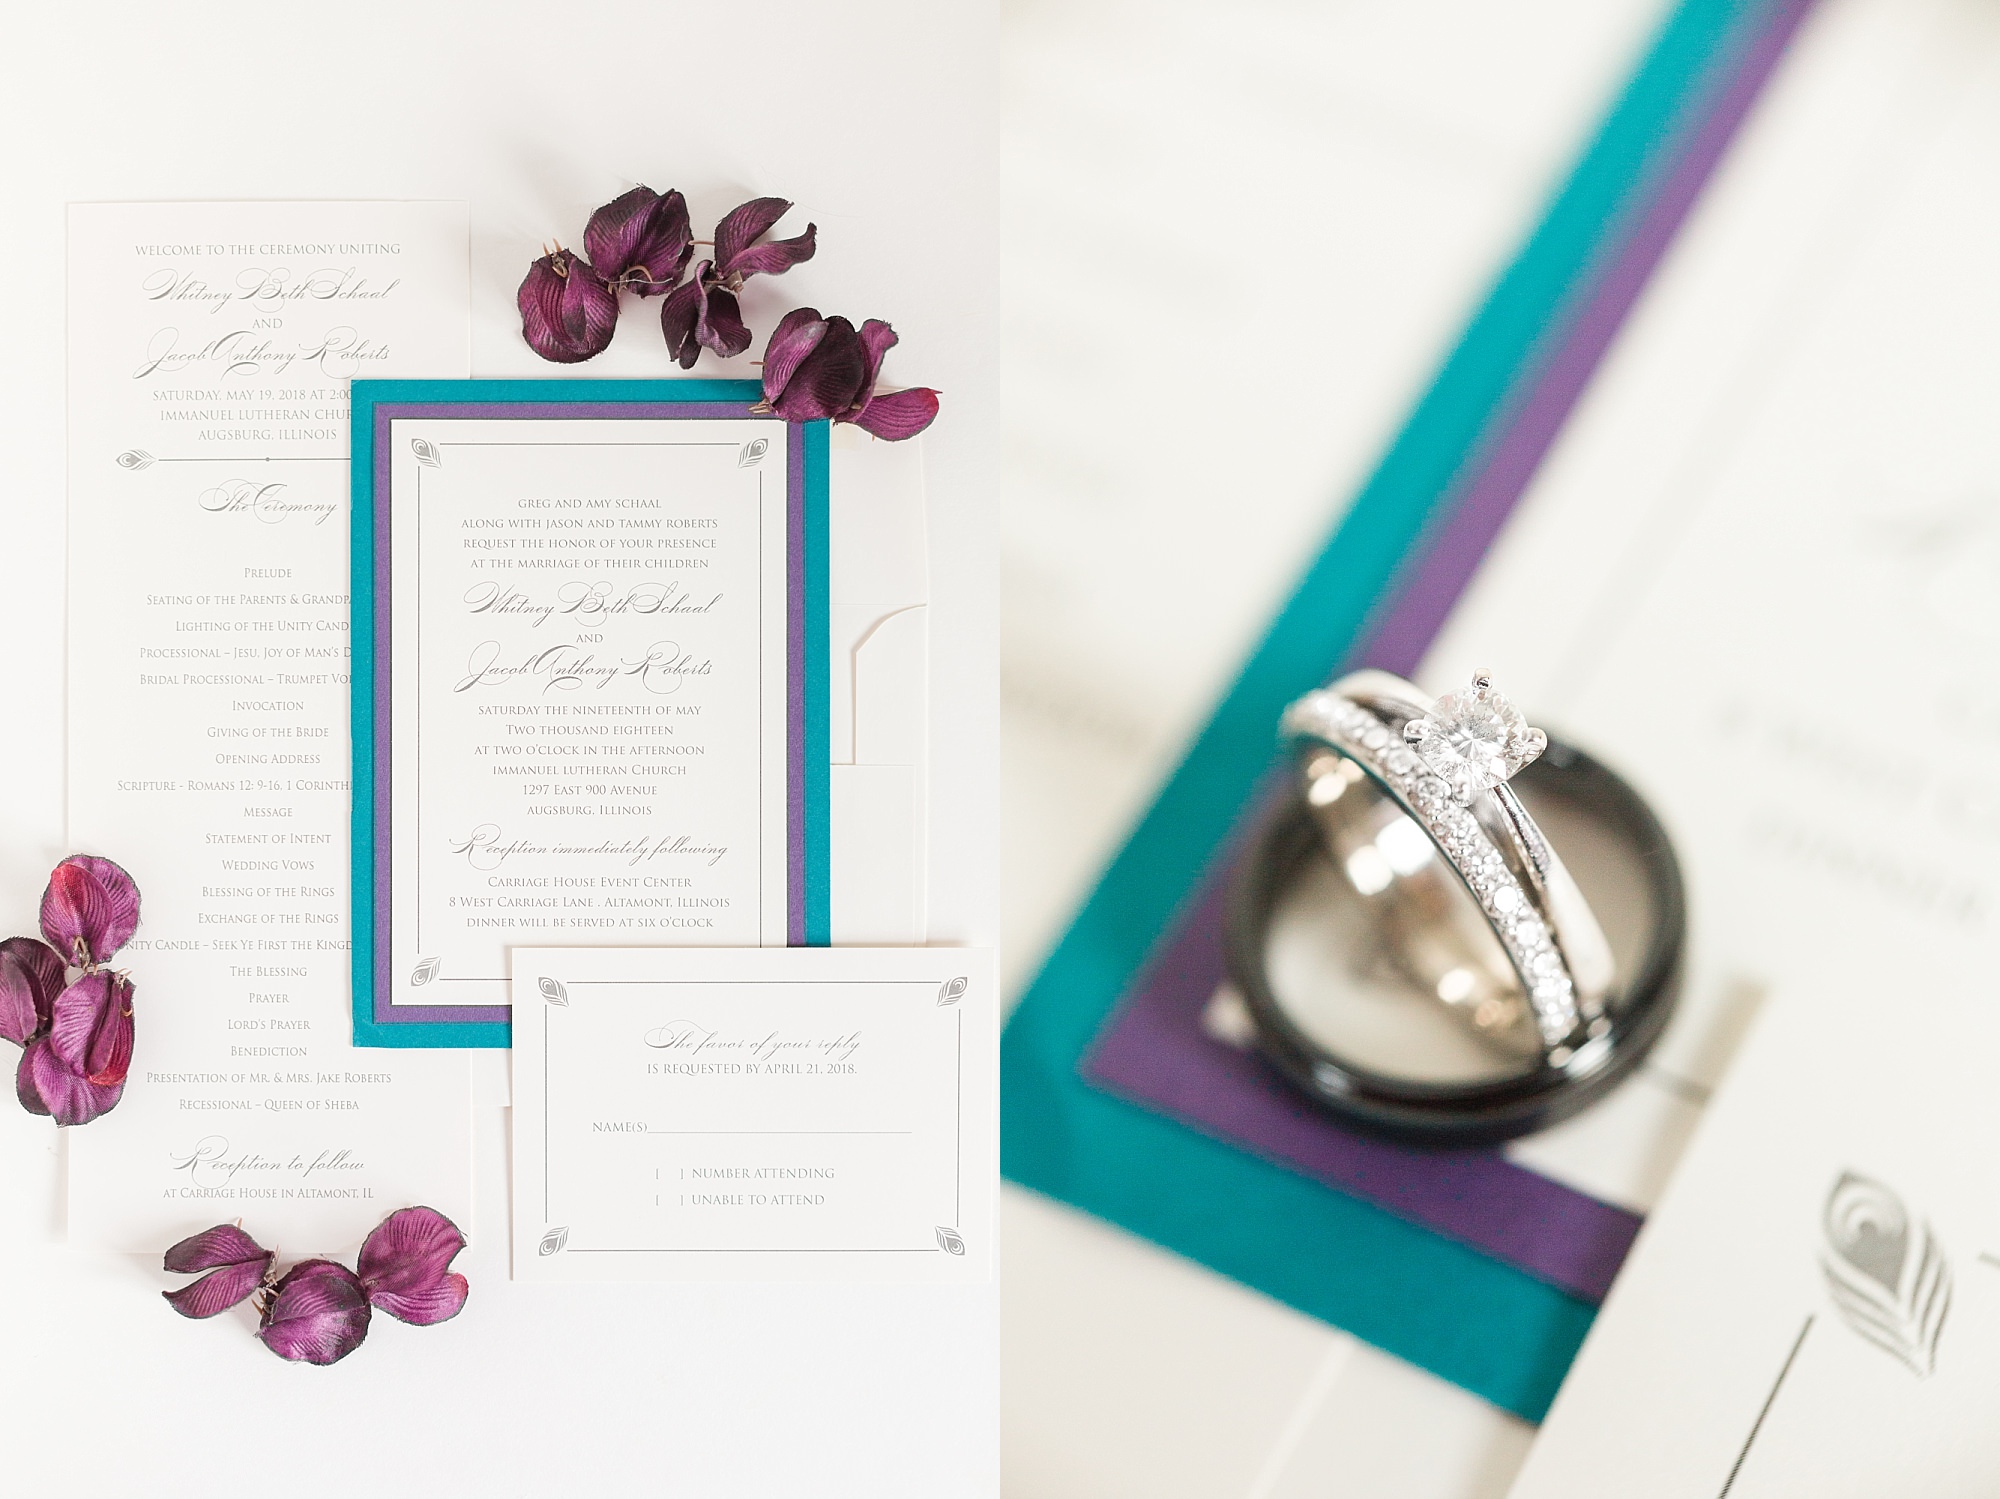 White gold wedding set rests against a purple and blue edge of a wedding invitation suite. 